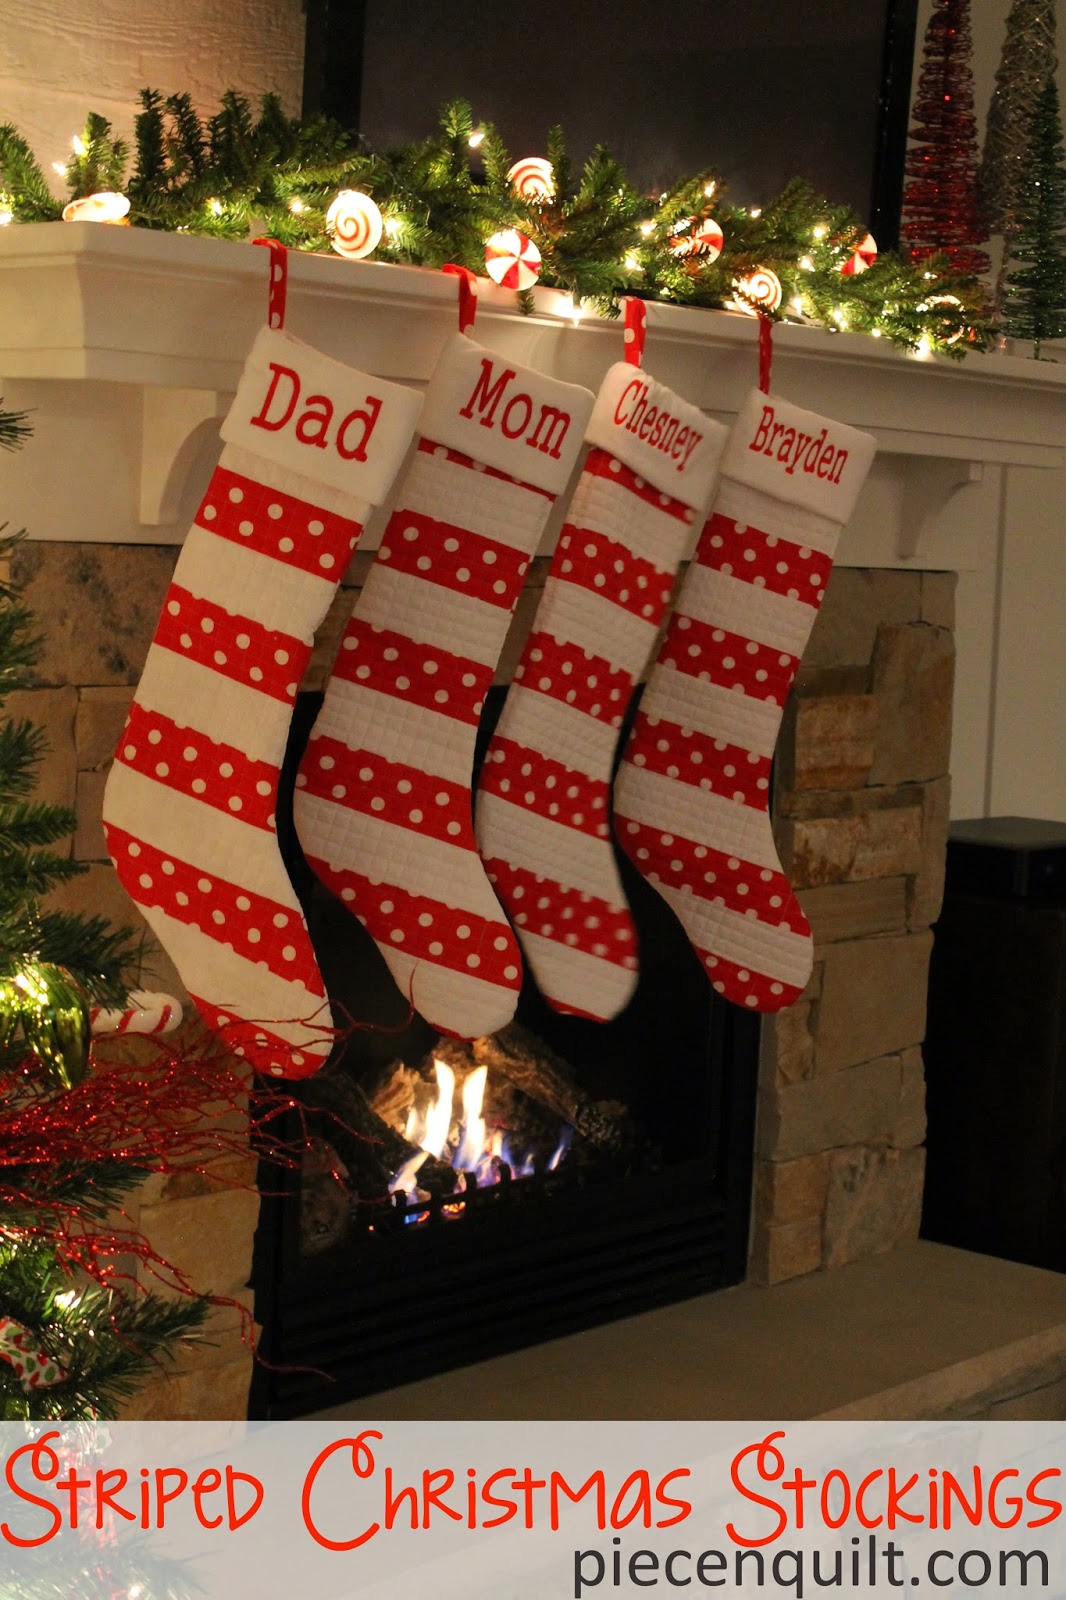 Handmade Christmas Stocking Tutorials - Diary of a Quilter